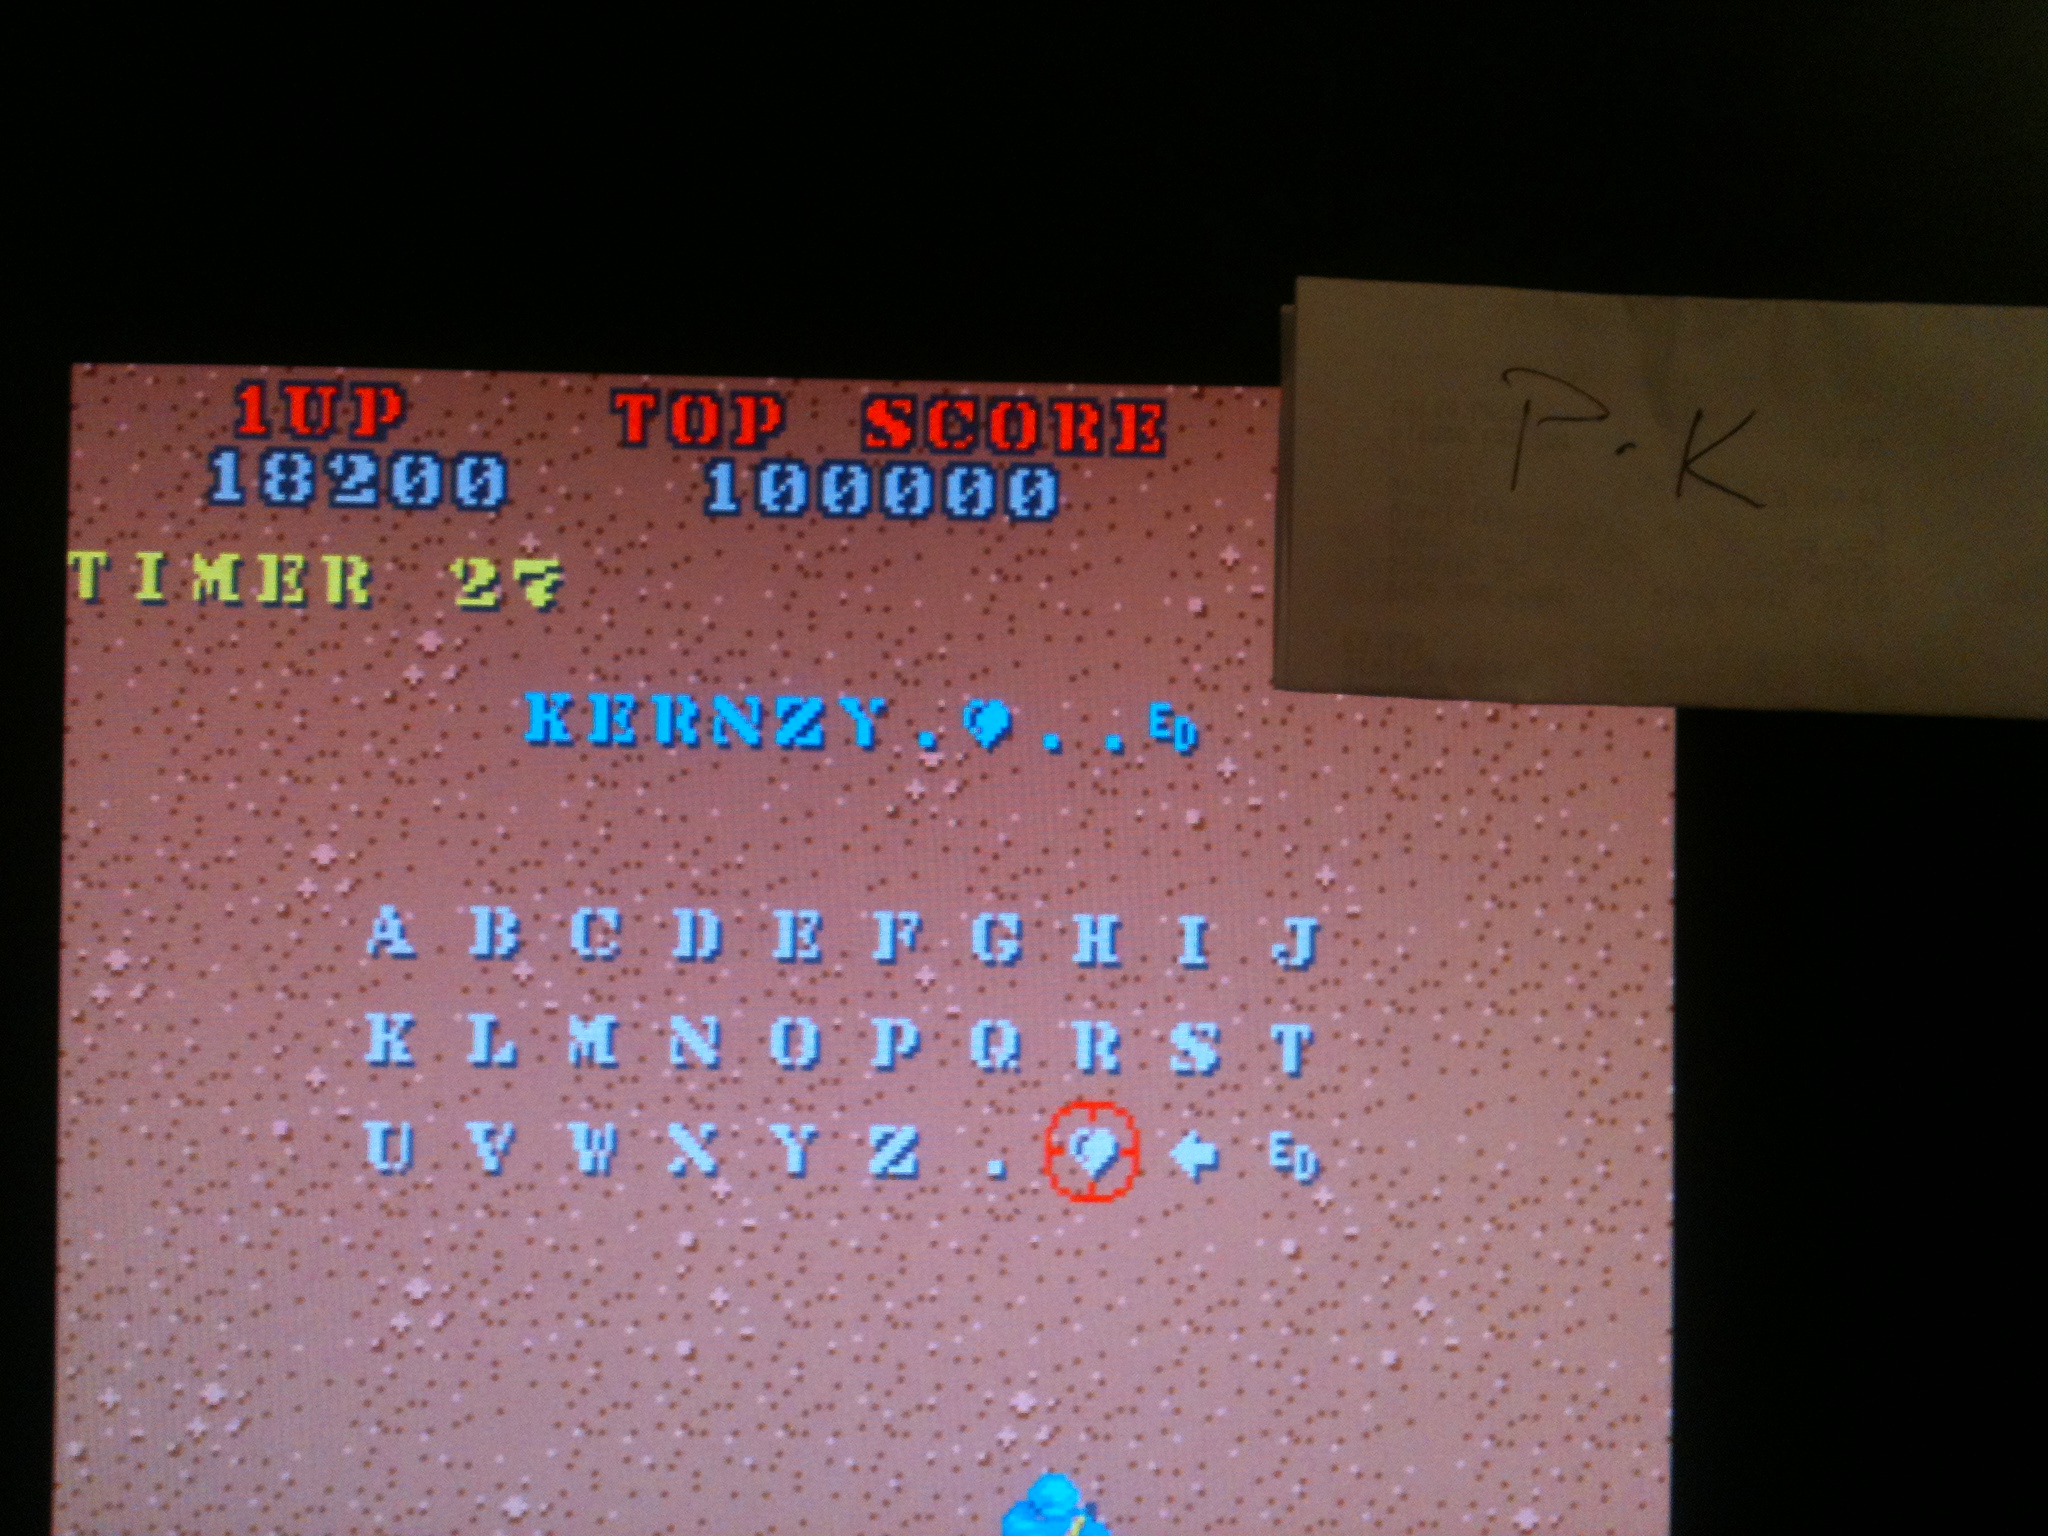 kernzy: Commando (Atari ST Emulated) 18,200 points on 2015-02-02 08:04:54